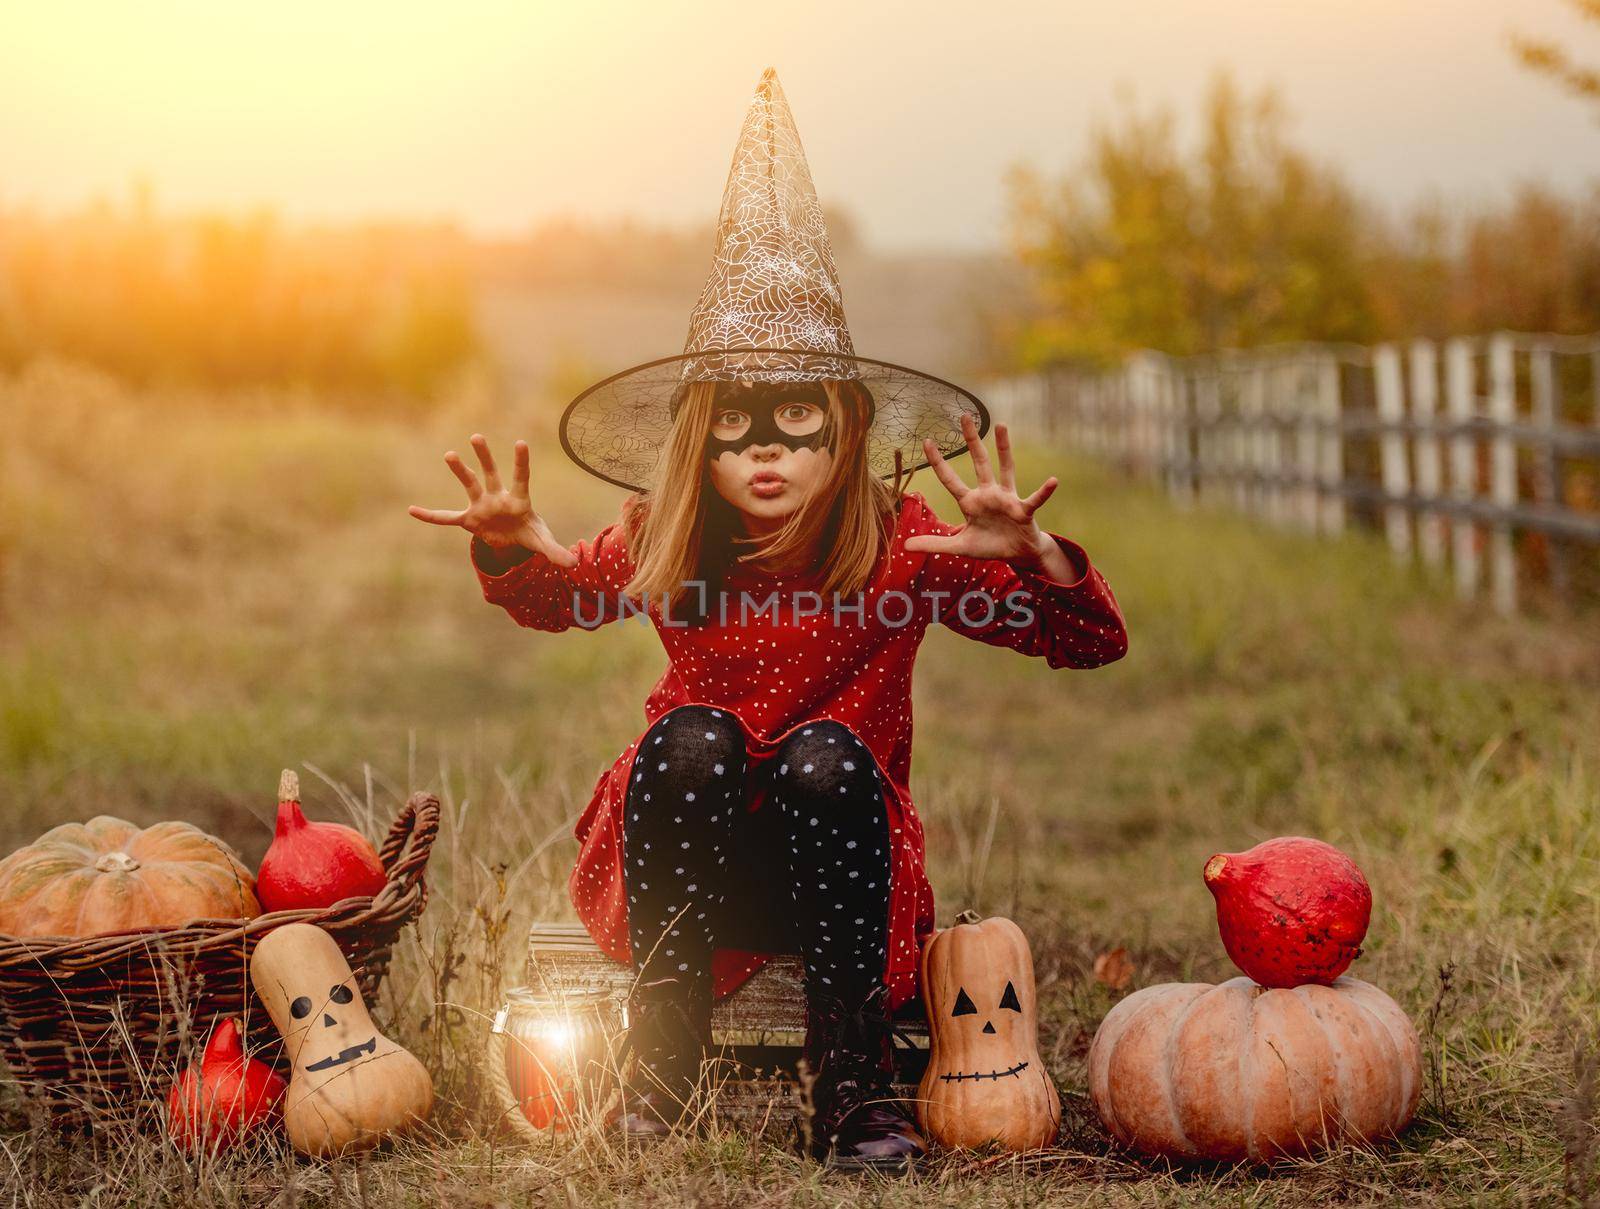 Little girl in halloween costume sitting next to pumpkins while frightening at camera on autumn nature